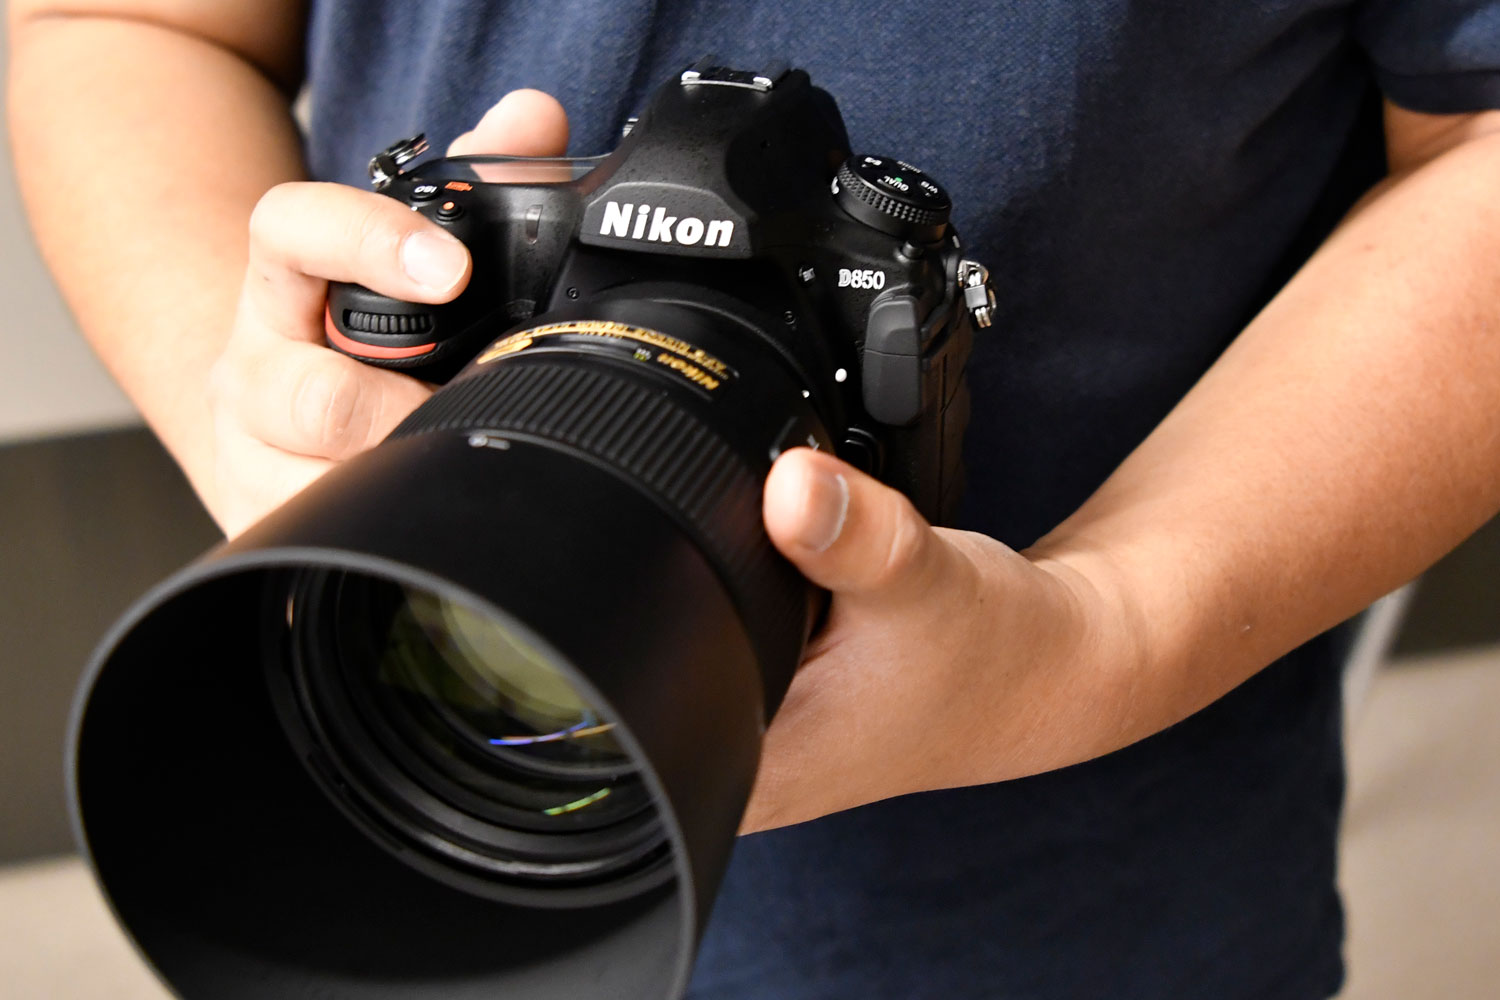 45.7 Megapixels of Full-Frame Glory: This is the Nikon D850